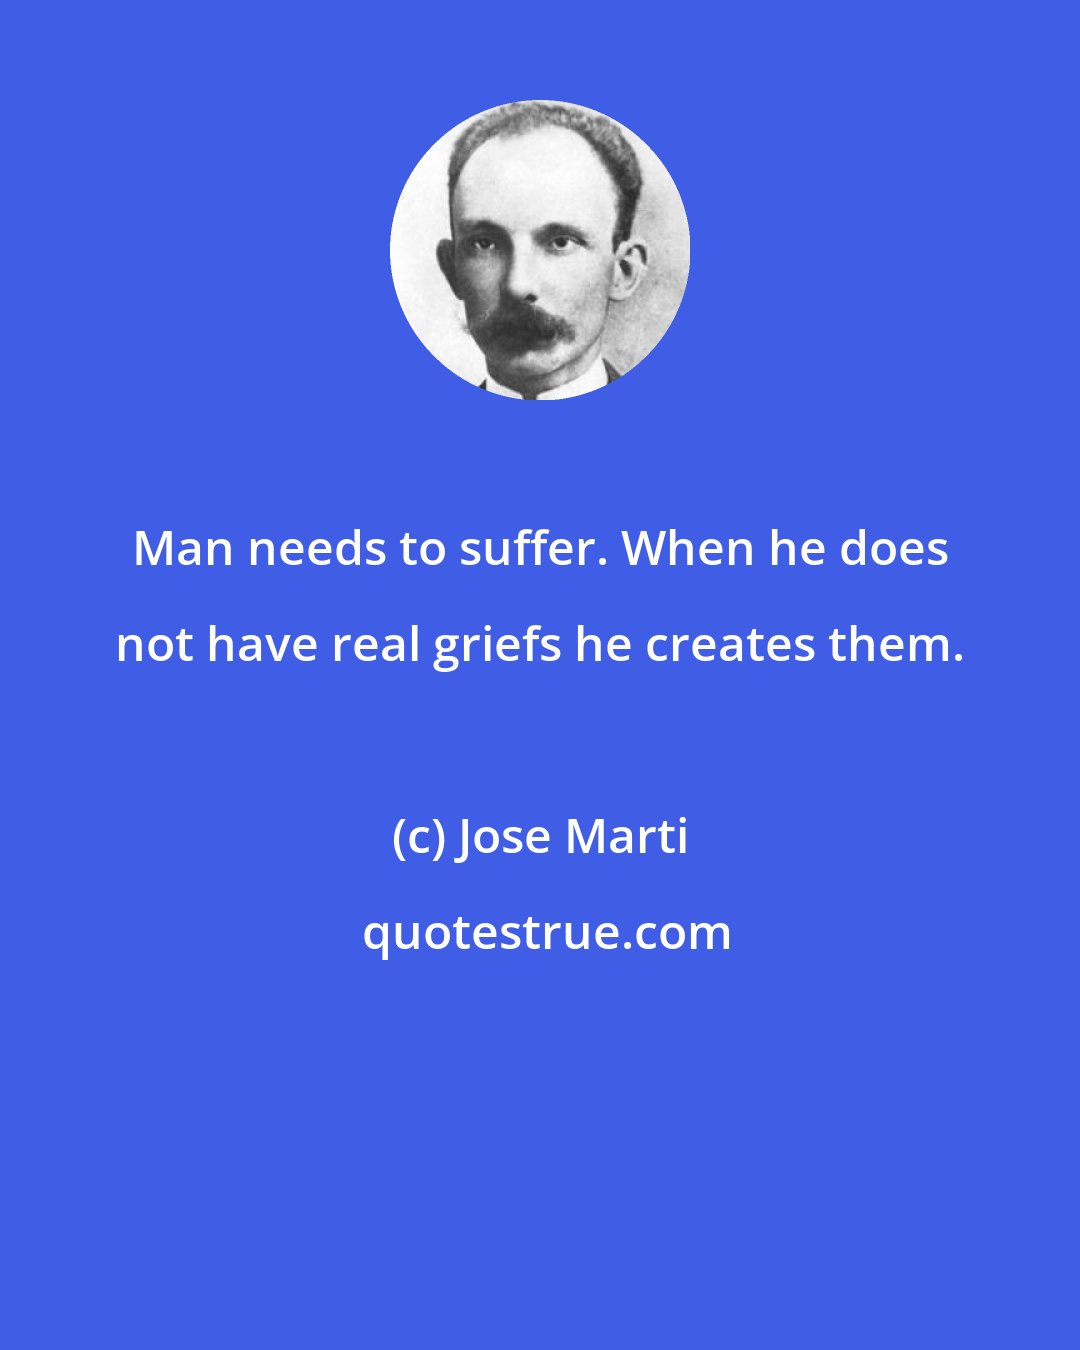 Jose Marti: Man needs to suffer. When he does not have real griefs he creates them.